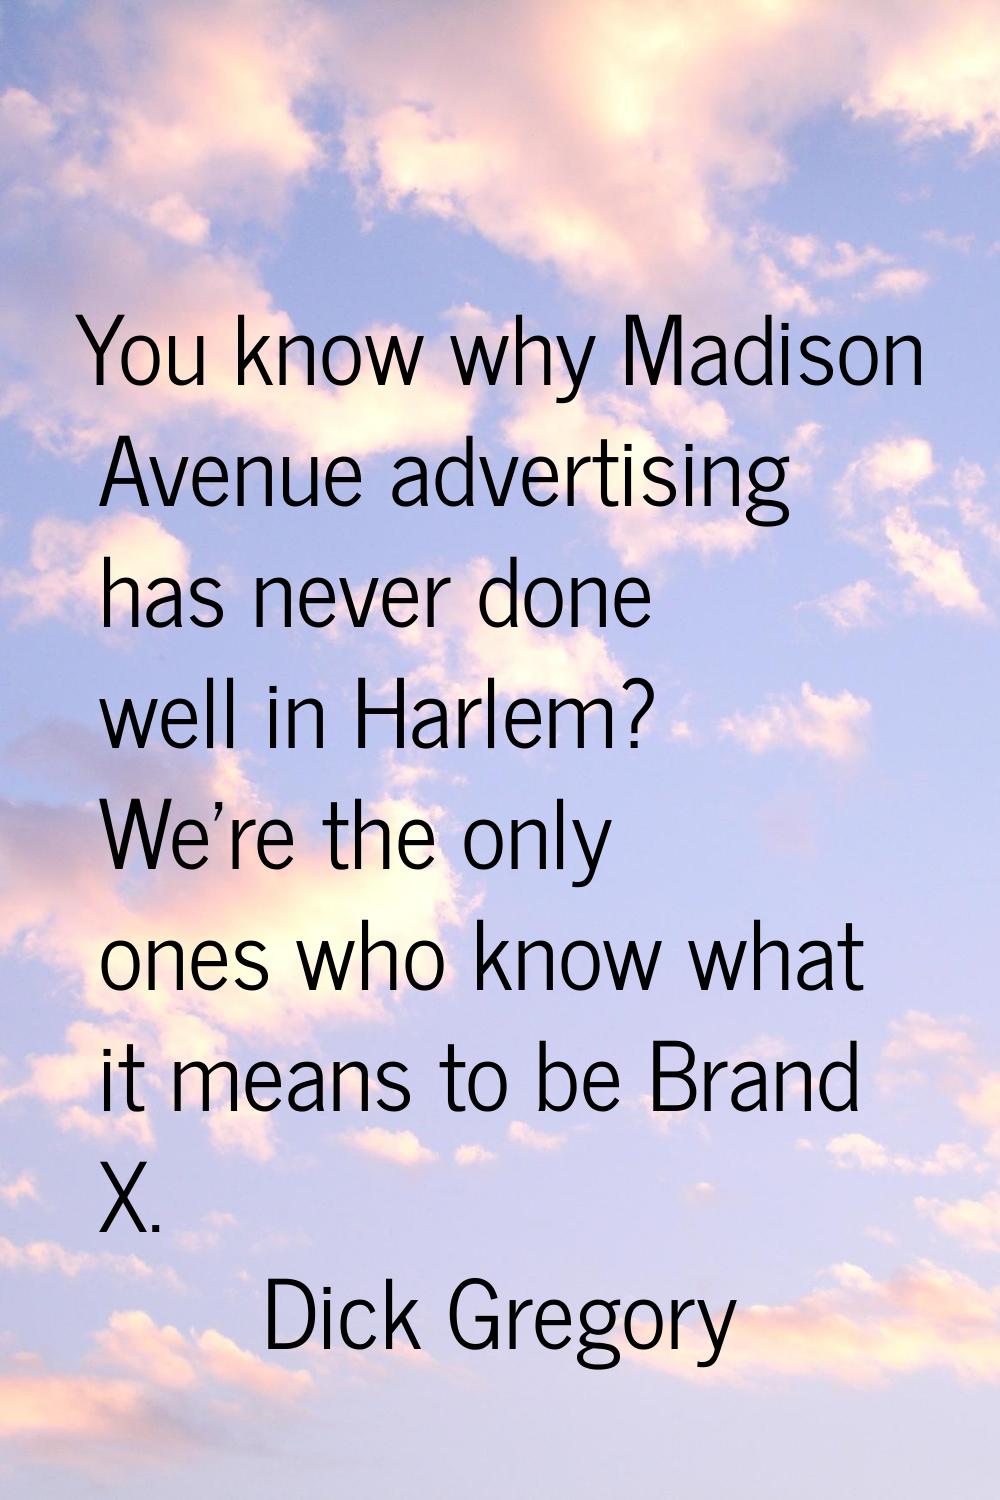 You know why Madison Avenue advertising has never done well in Harlem? We're the only ones who know